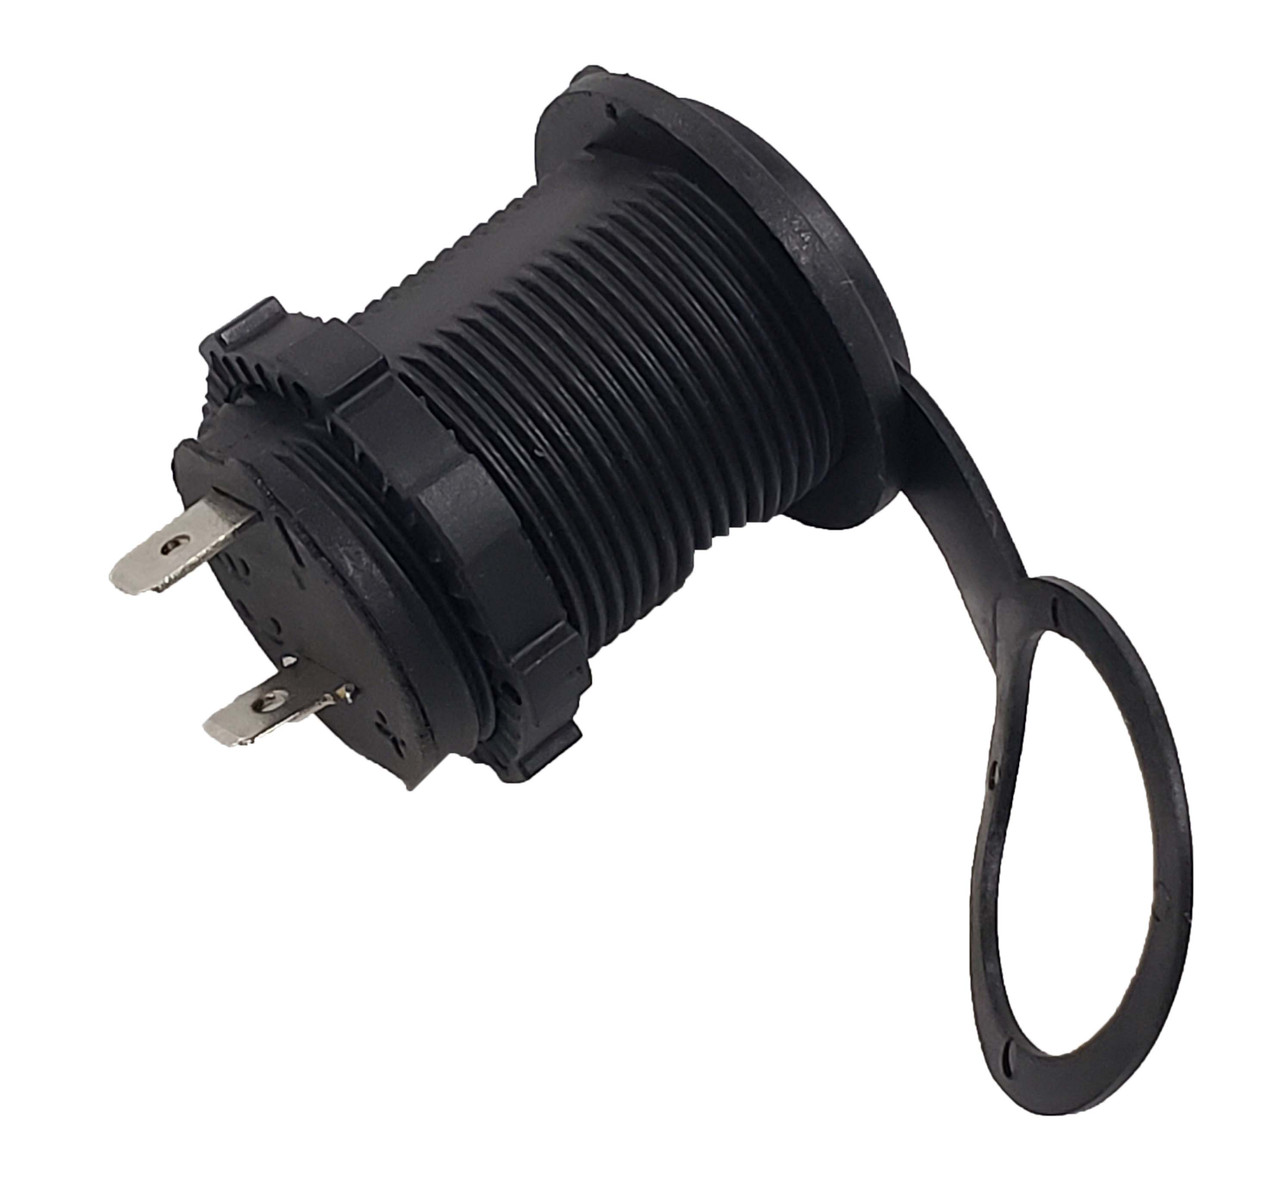 Recepticle, 12V, Power, W/Tether, Stainless Steel Body (16 Mo 2T). Replacement For No. 46026378